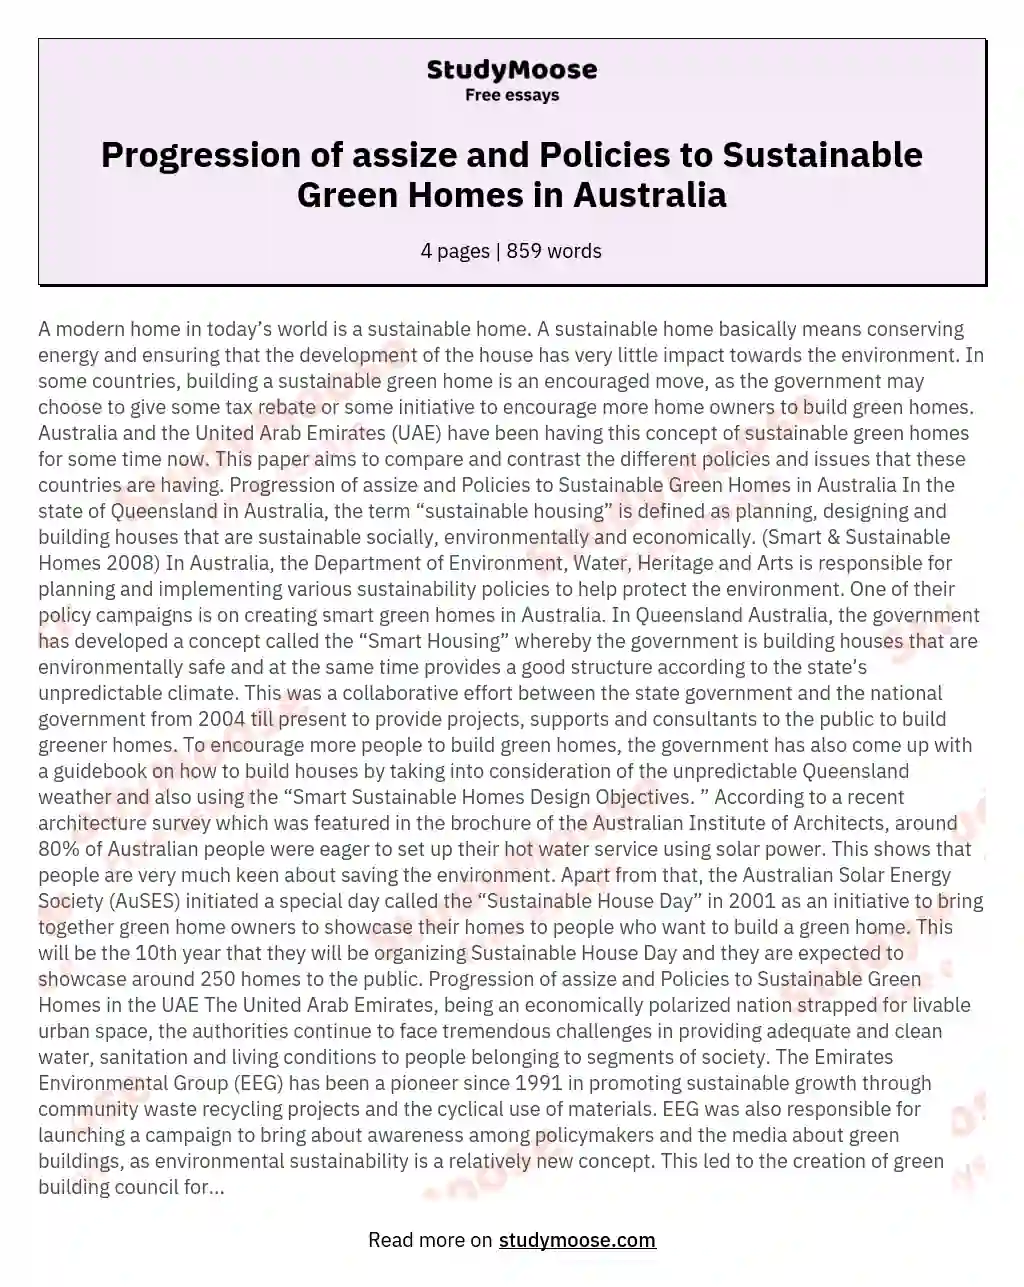 Progression of assize and Policies to Sustainable Green Homes in Australia